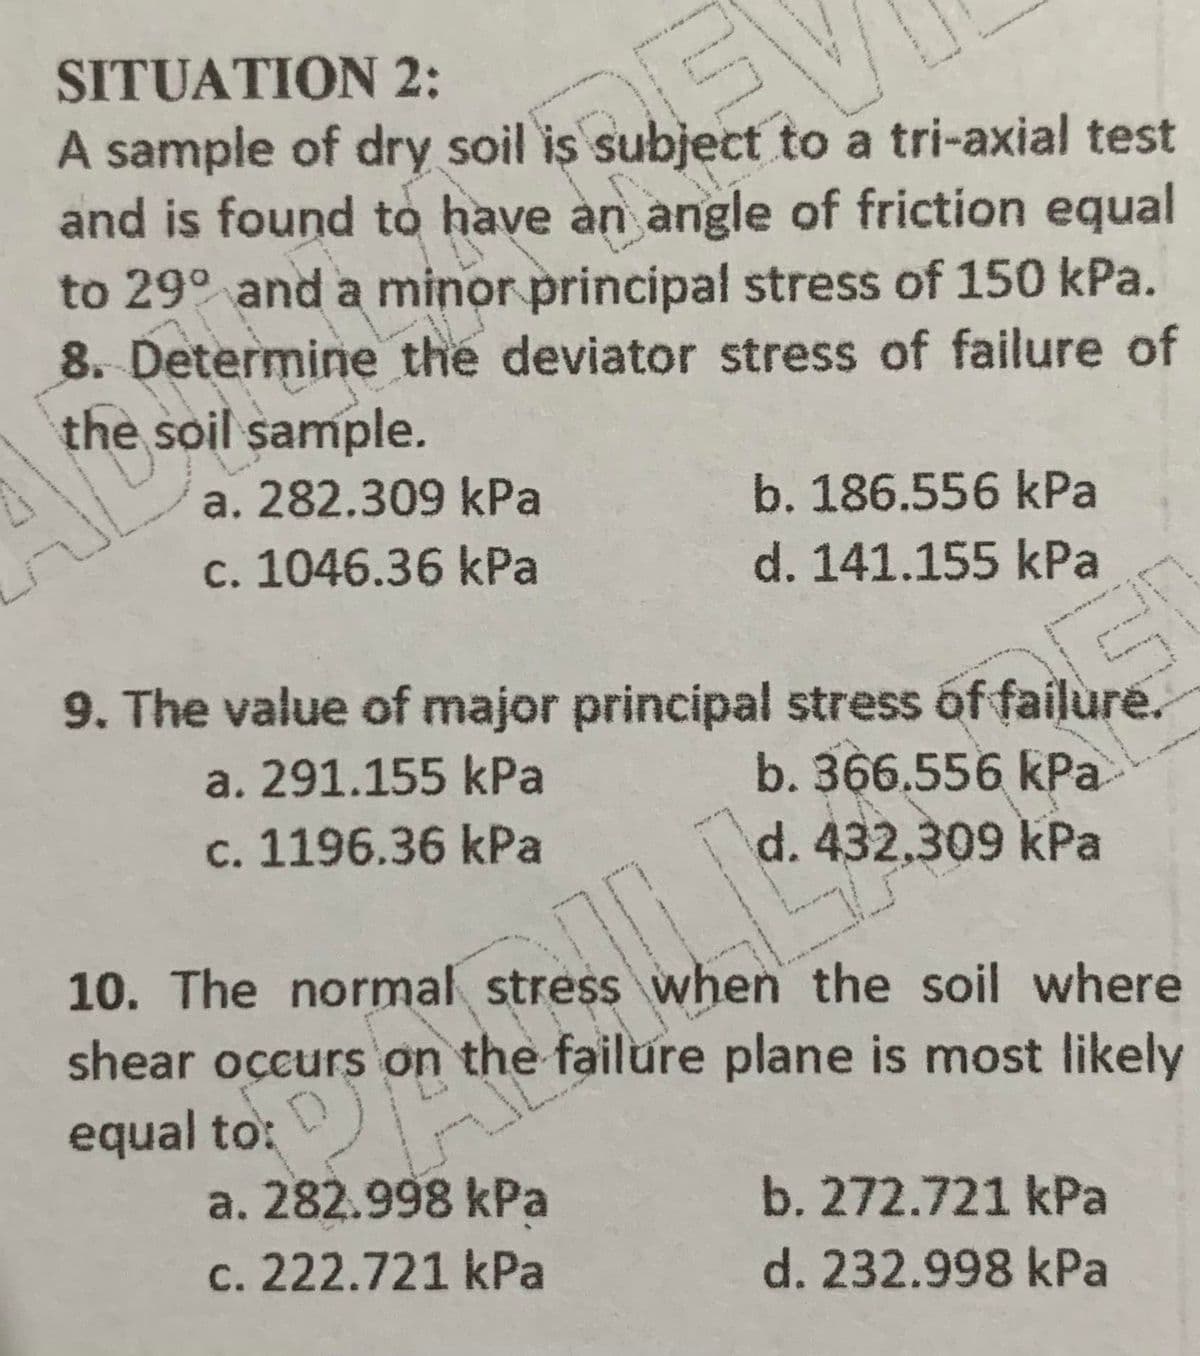 SITUATION 2:
A sample of dry soil is subject to a tri-axial test
and is found to have an angle of friction equal
to 29° and a minor principal stress of 150 kPa.
8. Determine the deviator stress of failure of
the soil sample.
a. 282.309 kPa
b. 186.556 kPa
c. 1046.36 kPa
d. 141.155 kPa
9. The value of major principal stress óf failure.
b. 366.556 kPa
d. 432,309 kPa
a. 291.155 kPa
c. 1196.36 kPa
10. The normal stress when the soil where
shear occurs on the failure plane is most likely
equal to:
a. 282.998 kPa
c. 222.721 kPa
b. 272.721 kPa
d. 232.998 kPa
